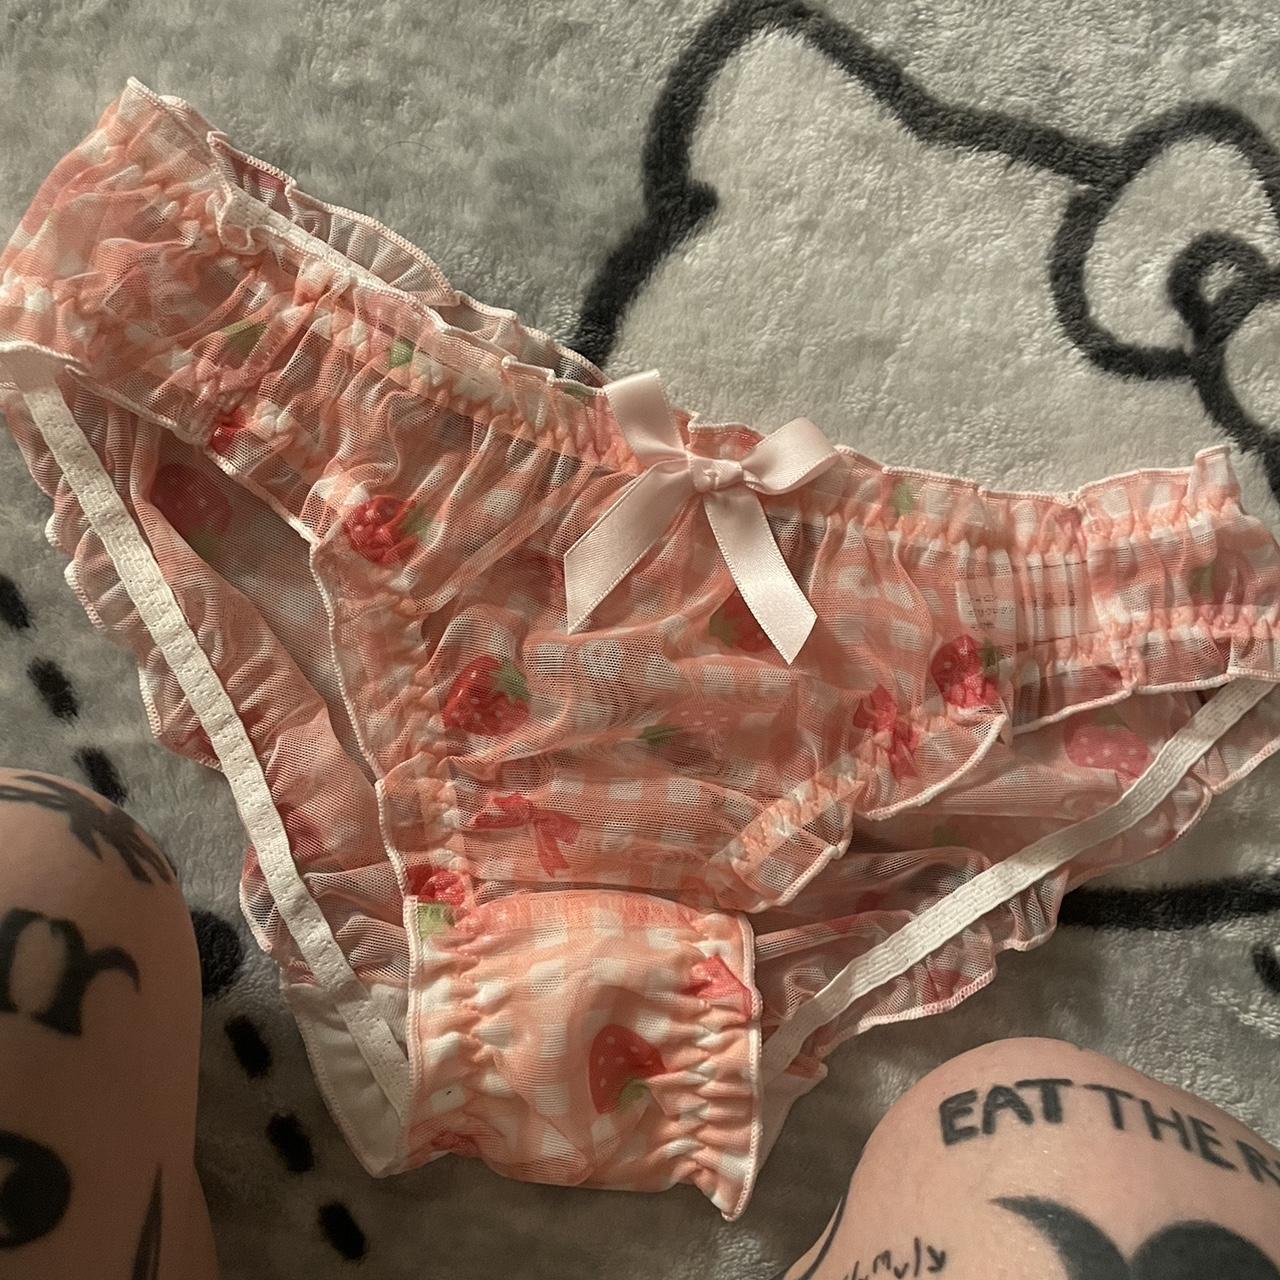 coquette white and pink ribbon panties these are - Depop